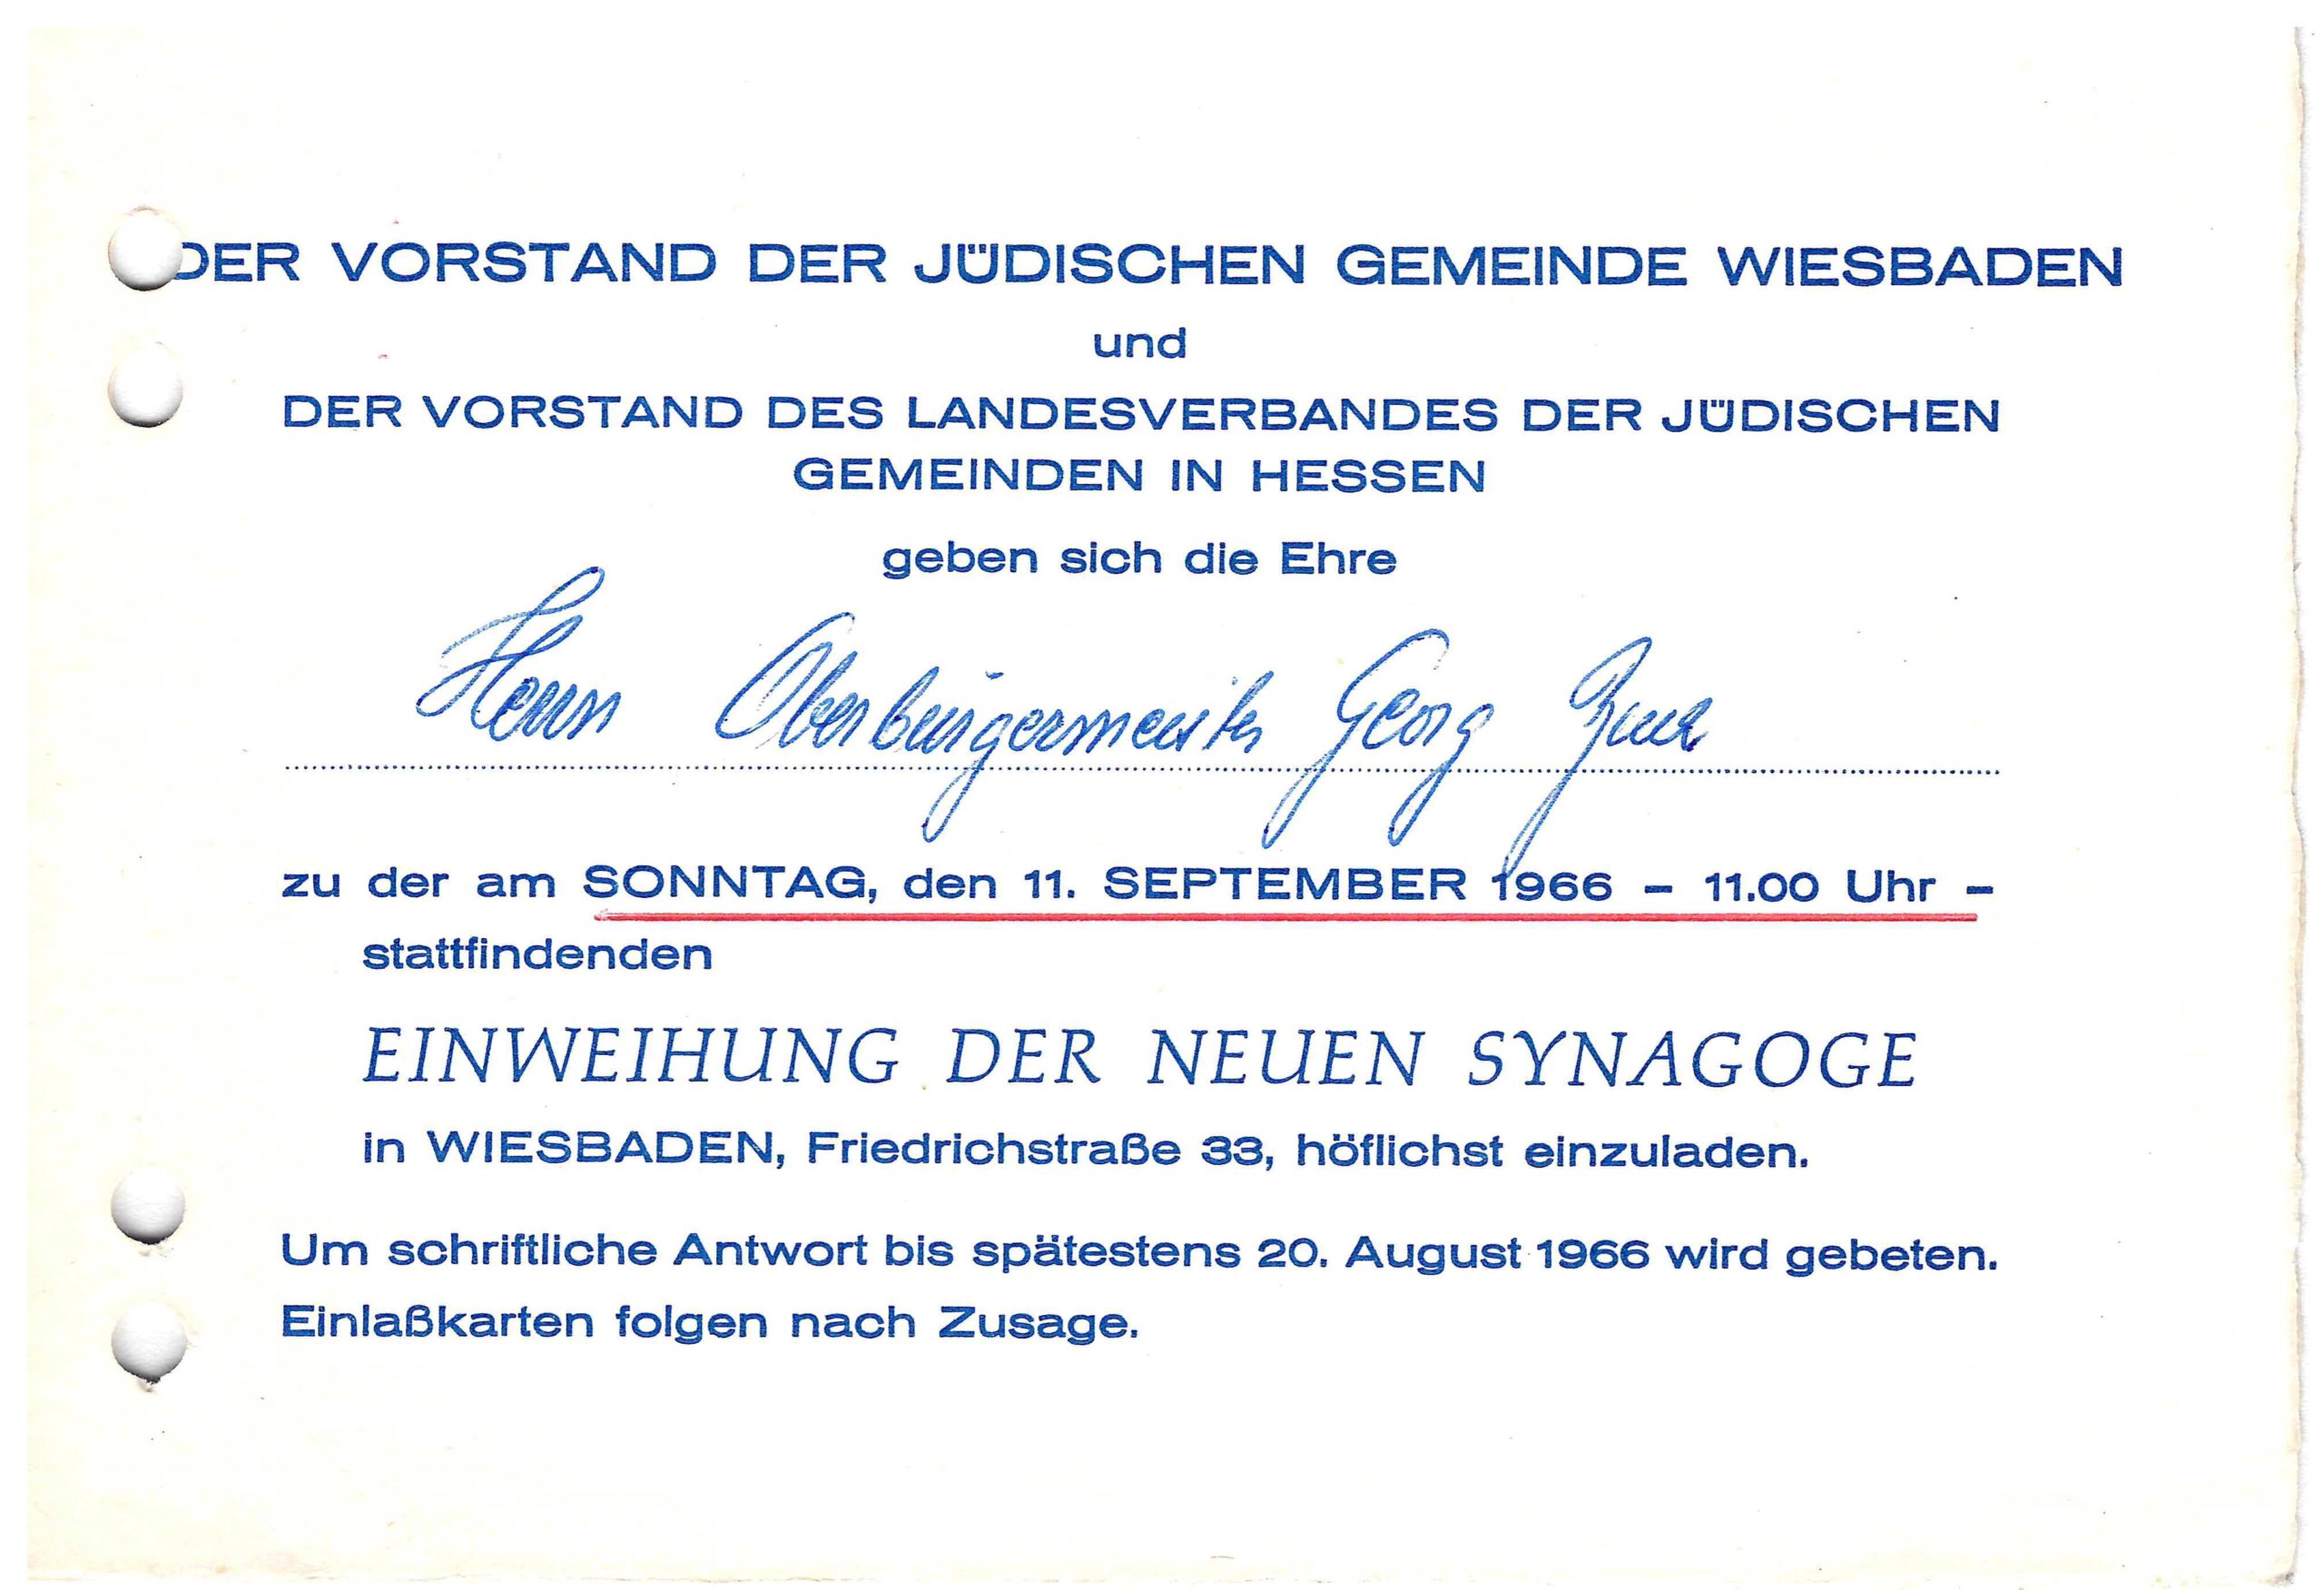 Invitation to the inauguration of the new synagogue building in 1966 for Mayor Buch. StadtA WI, WI/3, No. 2587